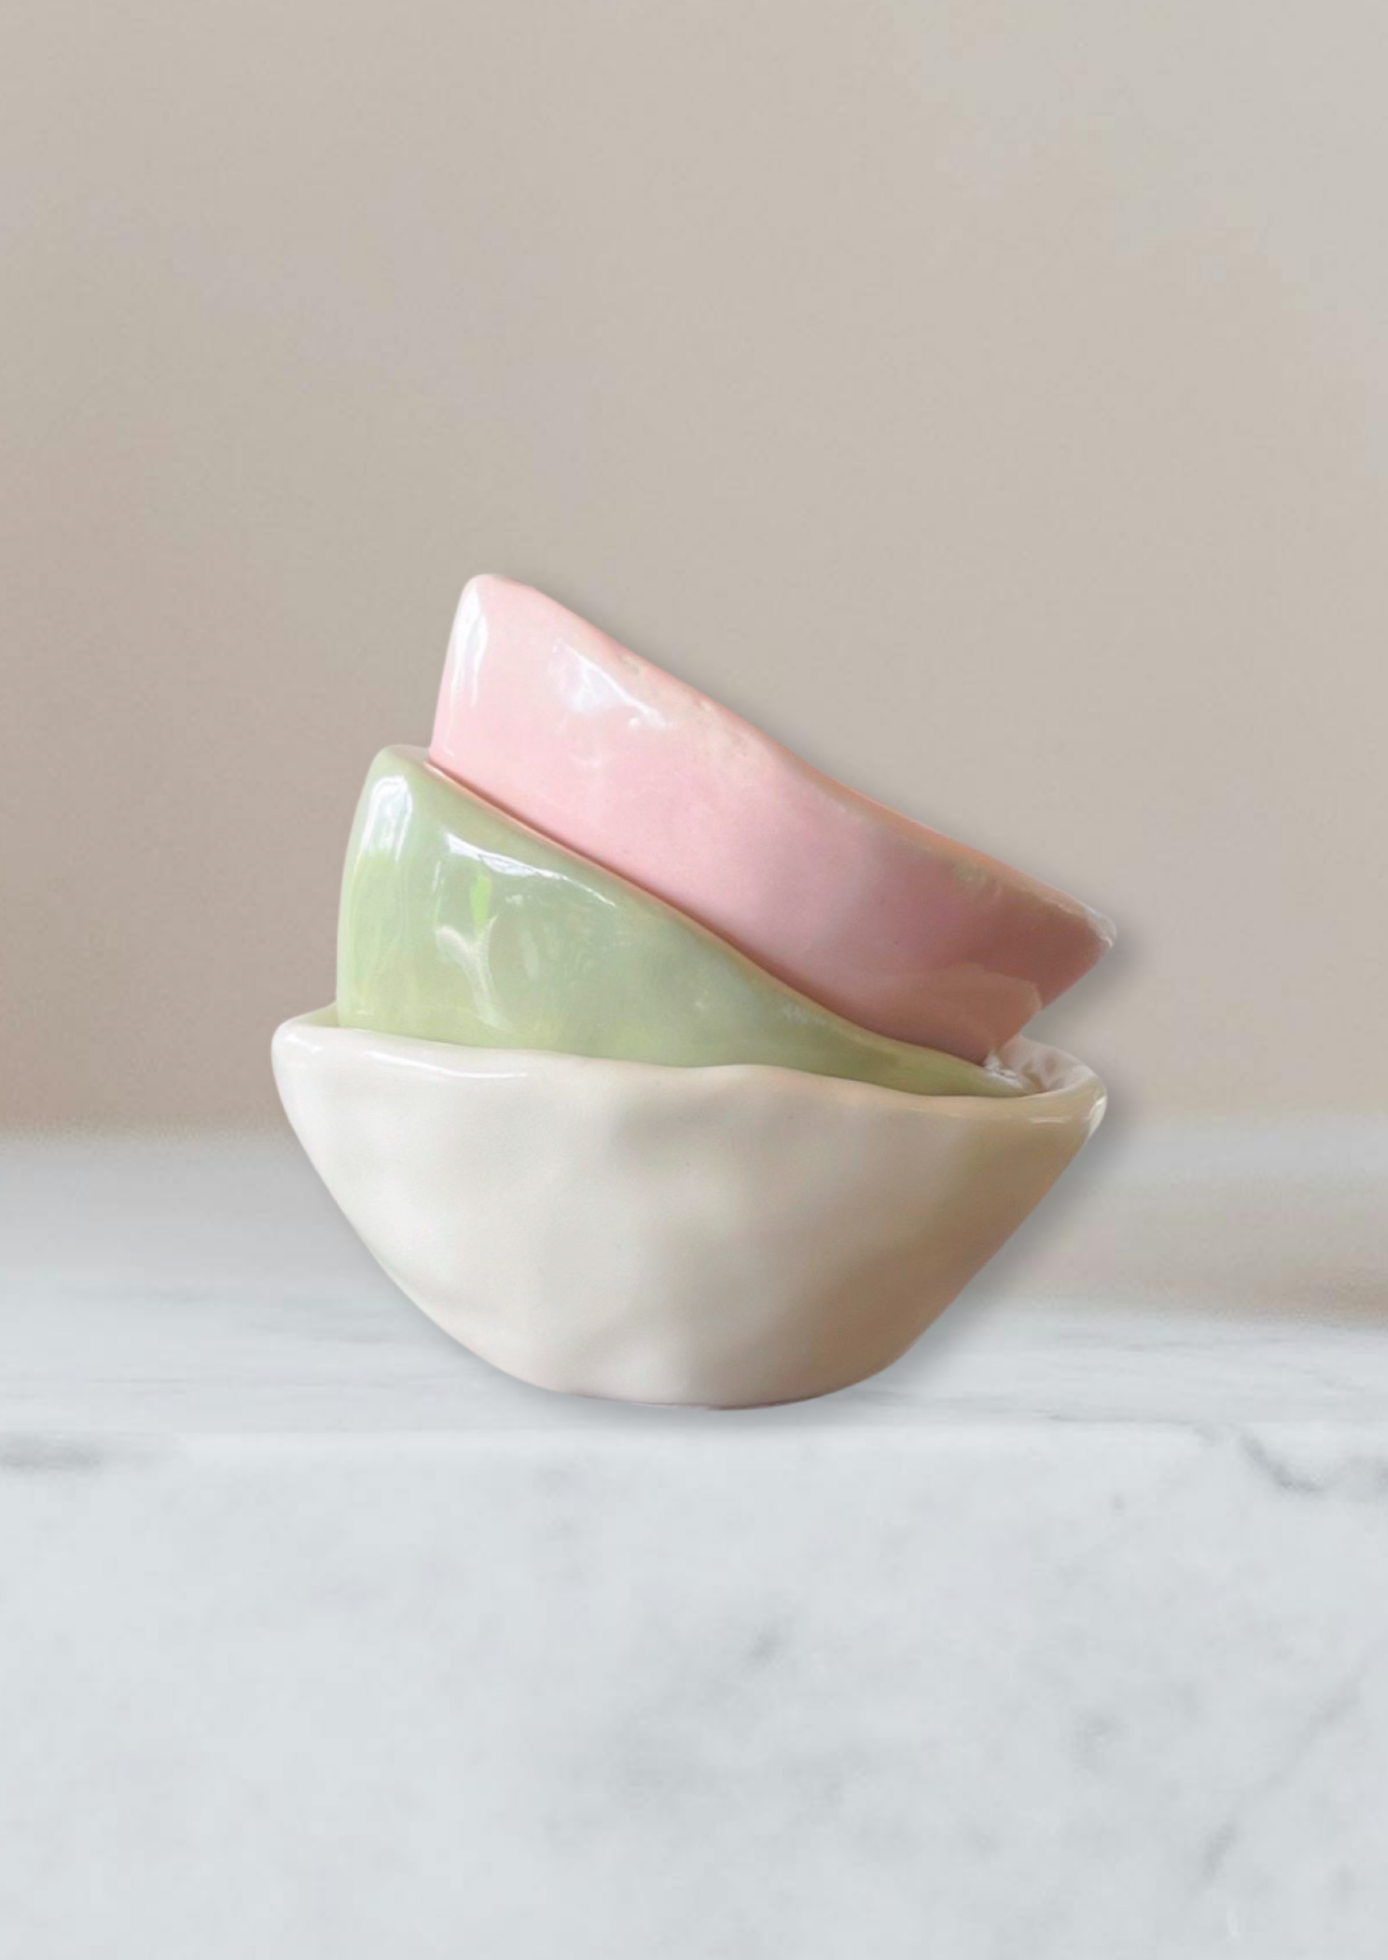 <h3>Maddison Bowl - 3 Colours</h3> <p>The Maddison Bowl is a range of bowls made for us here in New Zealand. This one is the smallest in the collection and comes in three soft shades, Snow, Petal and Pale Sage.</p> <p>As bowls are hand made, shades and shapes may vary. This adds to their uniqueness&nbsp;</p>